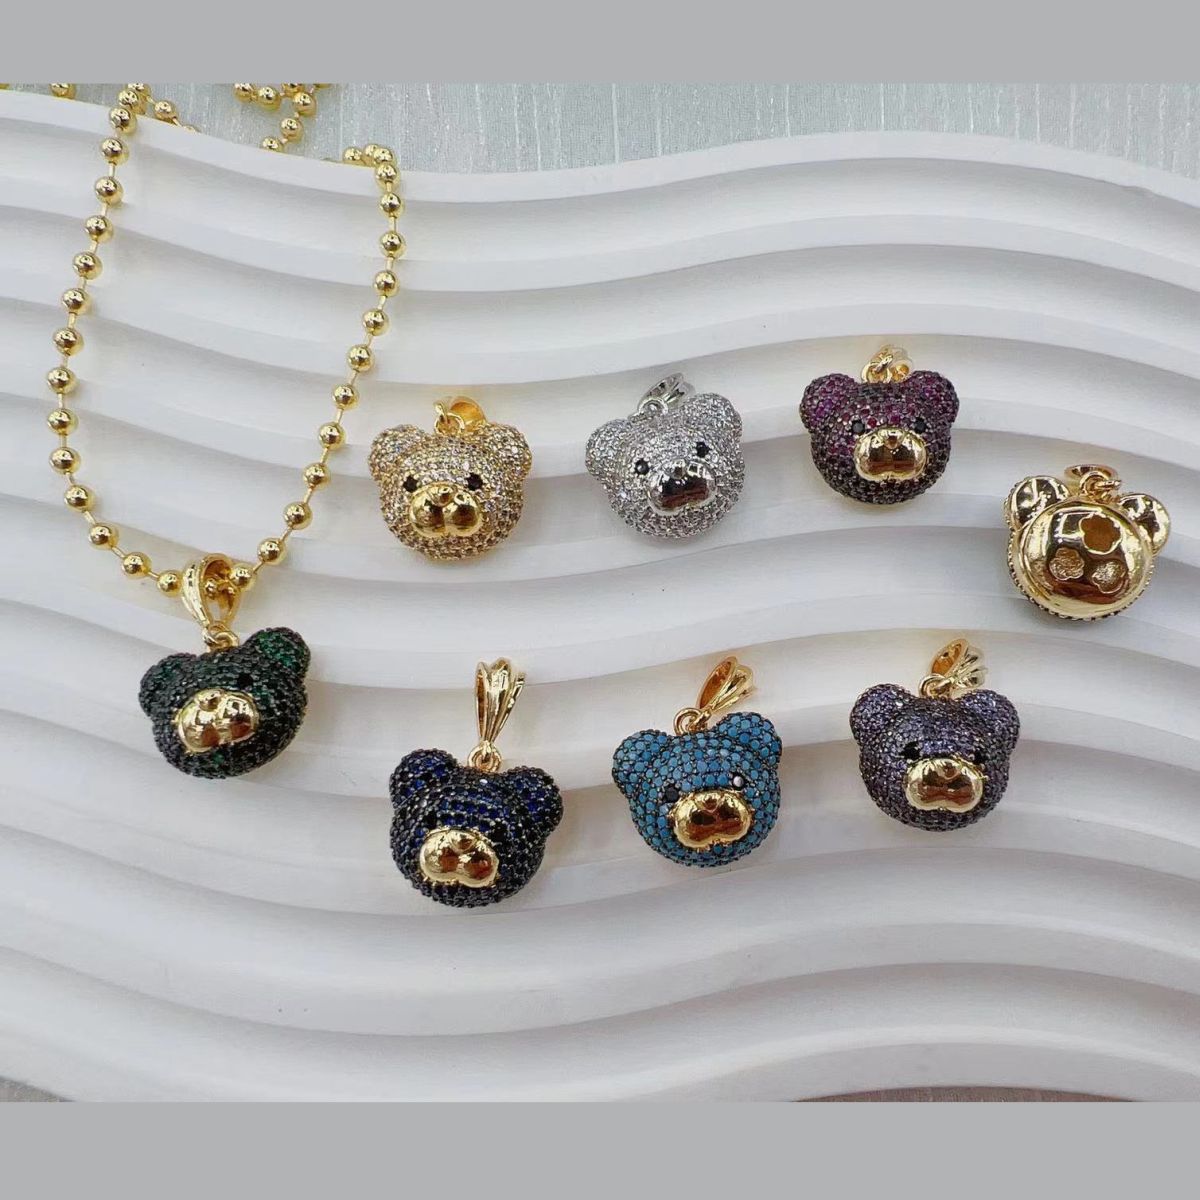 Pack of 3 beautiful pendant necklace for women and girls, two cute panda  and one daisy pendant necklace, gold plated chain